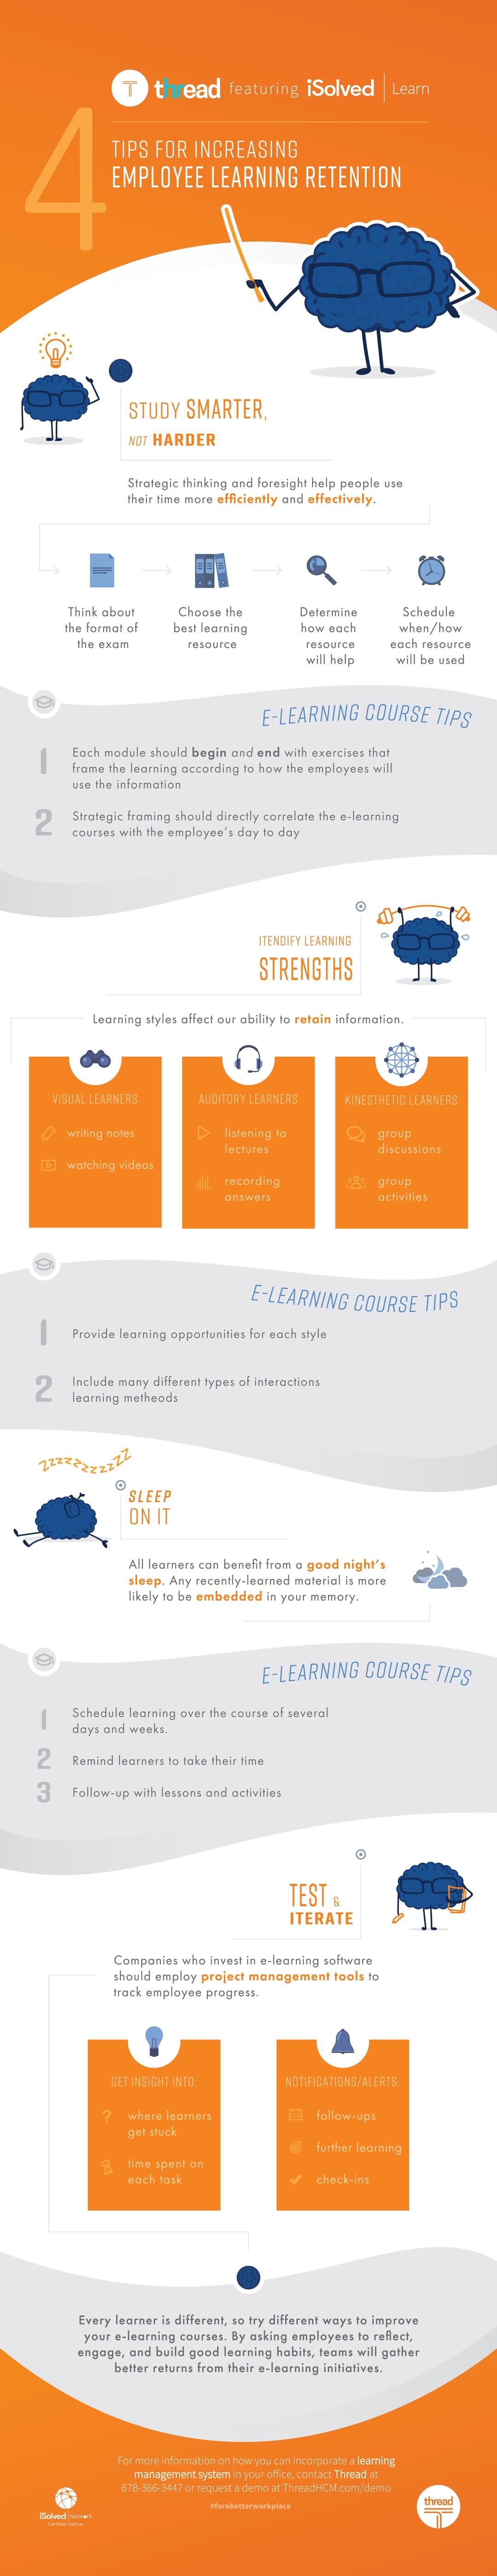 Infographic: 4 Tips for Increasing Employee Learning Retention